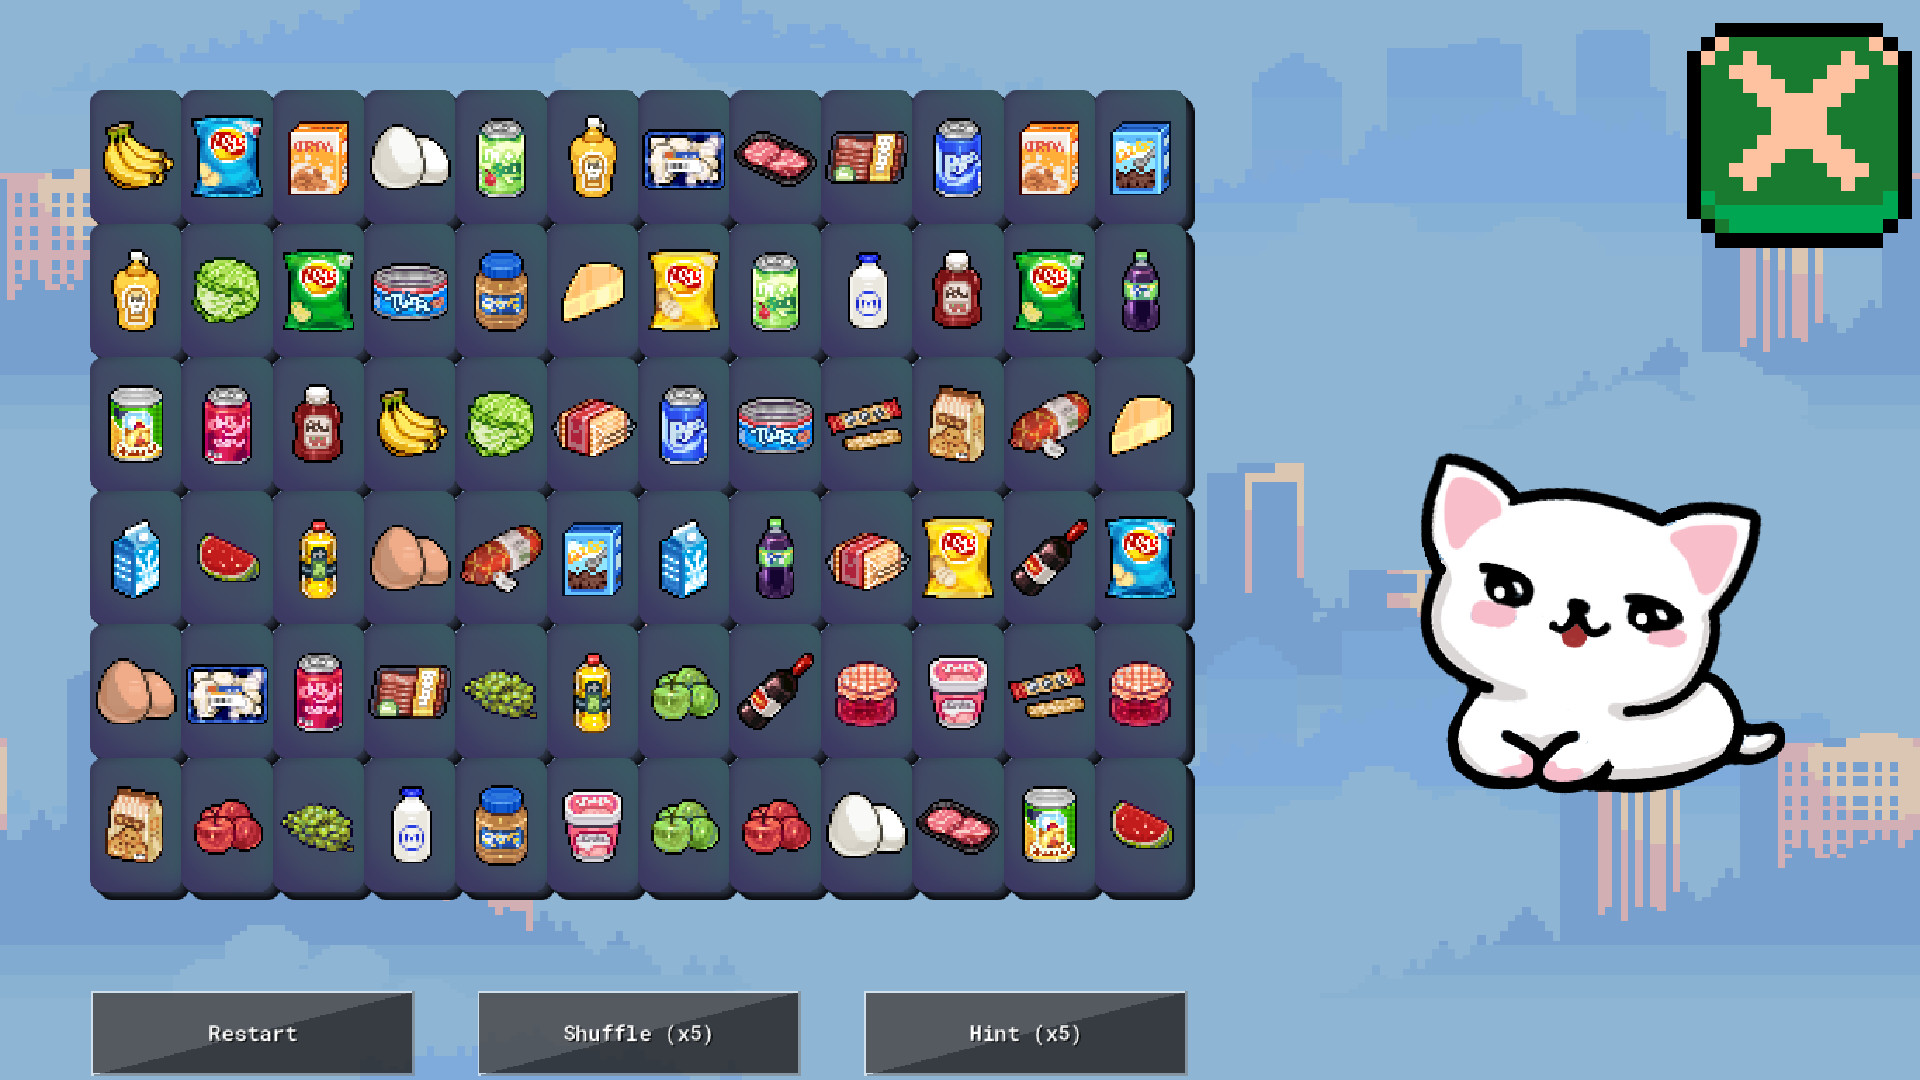 Yum Collector Free Download